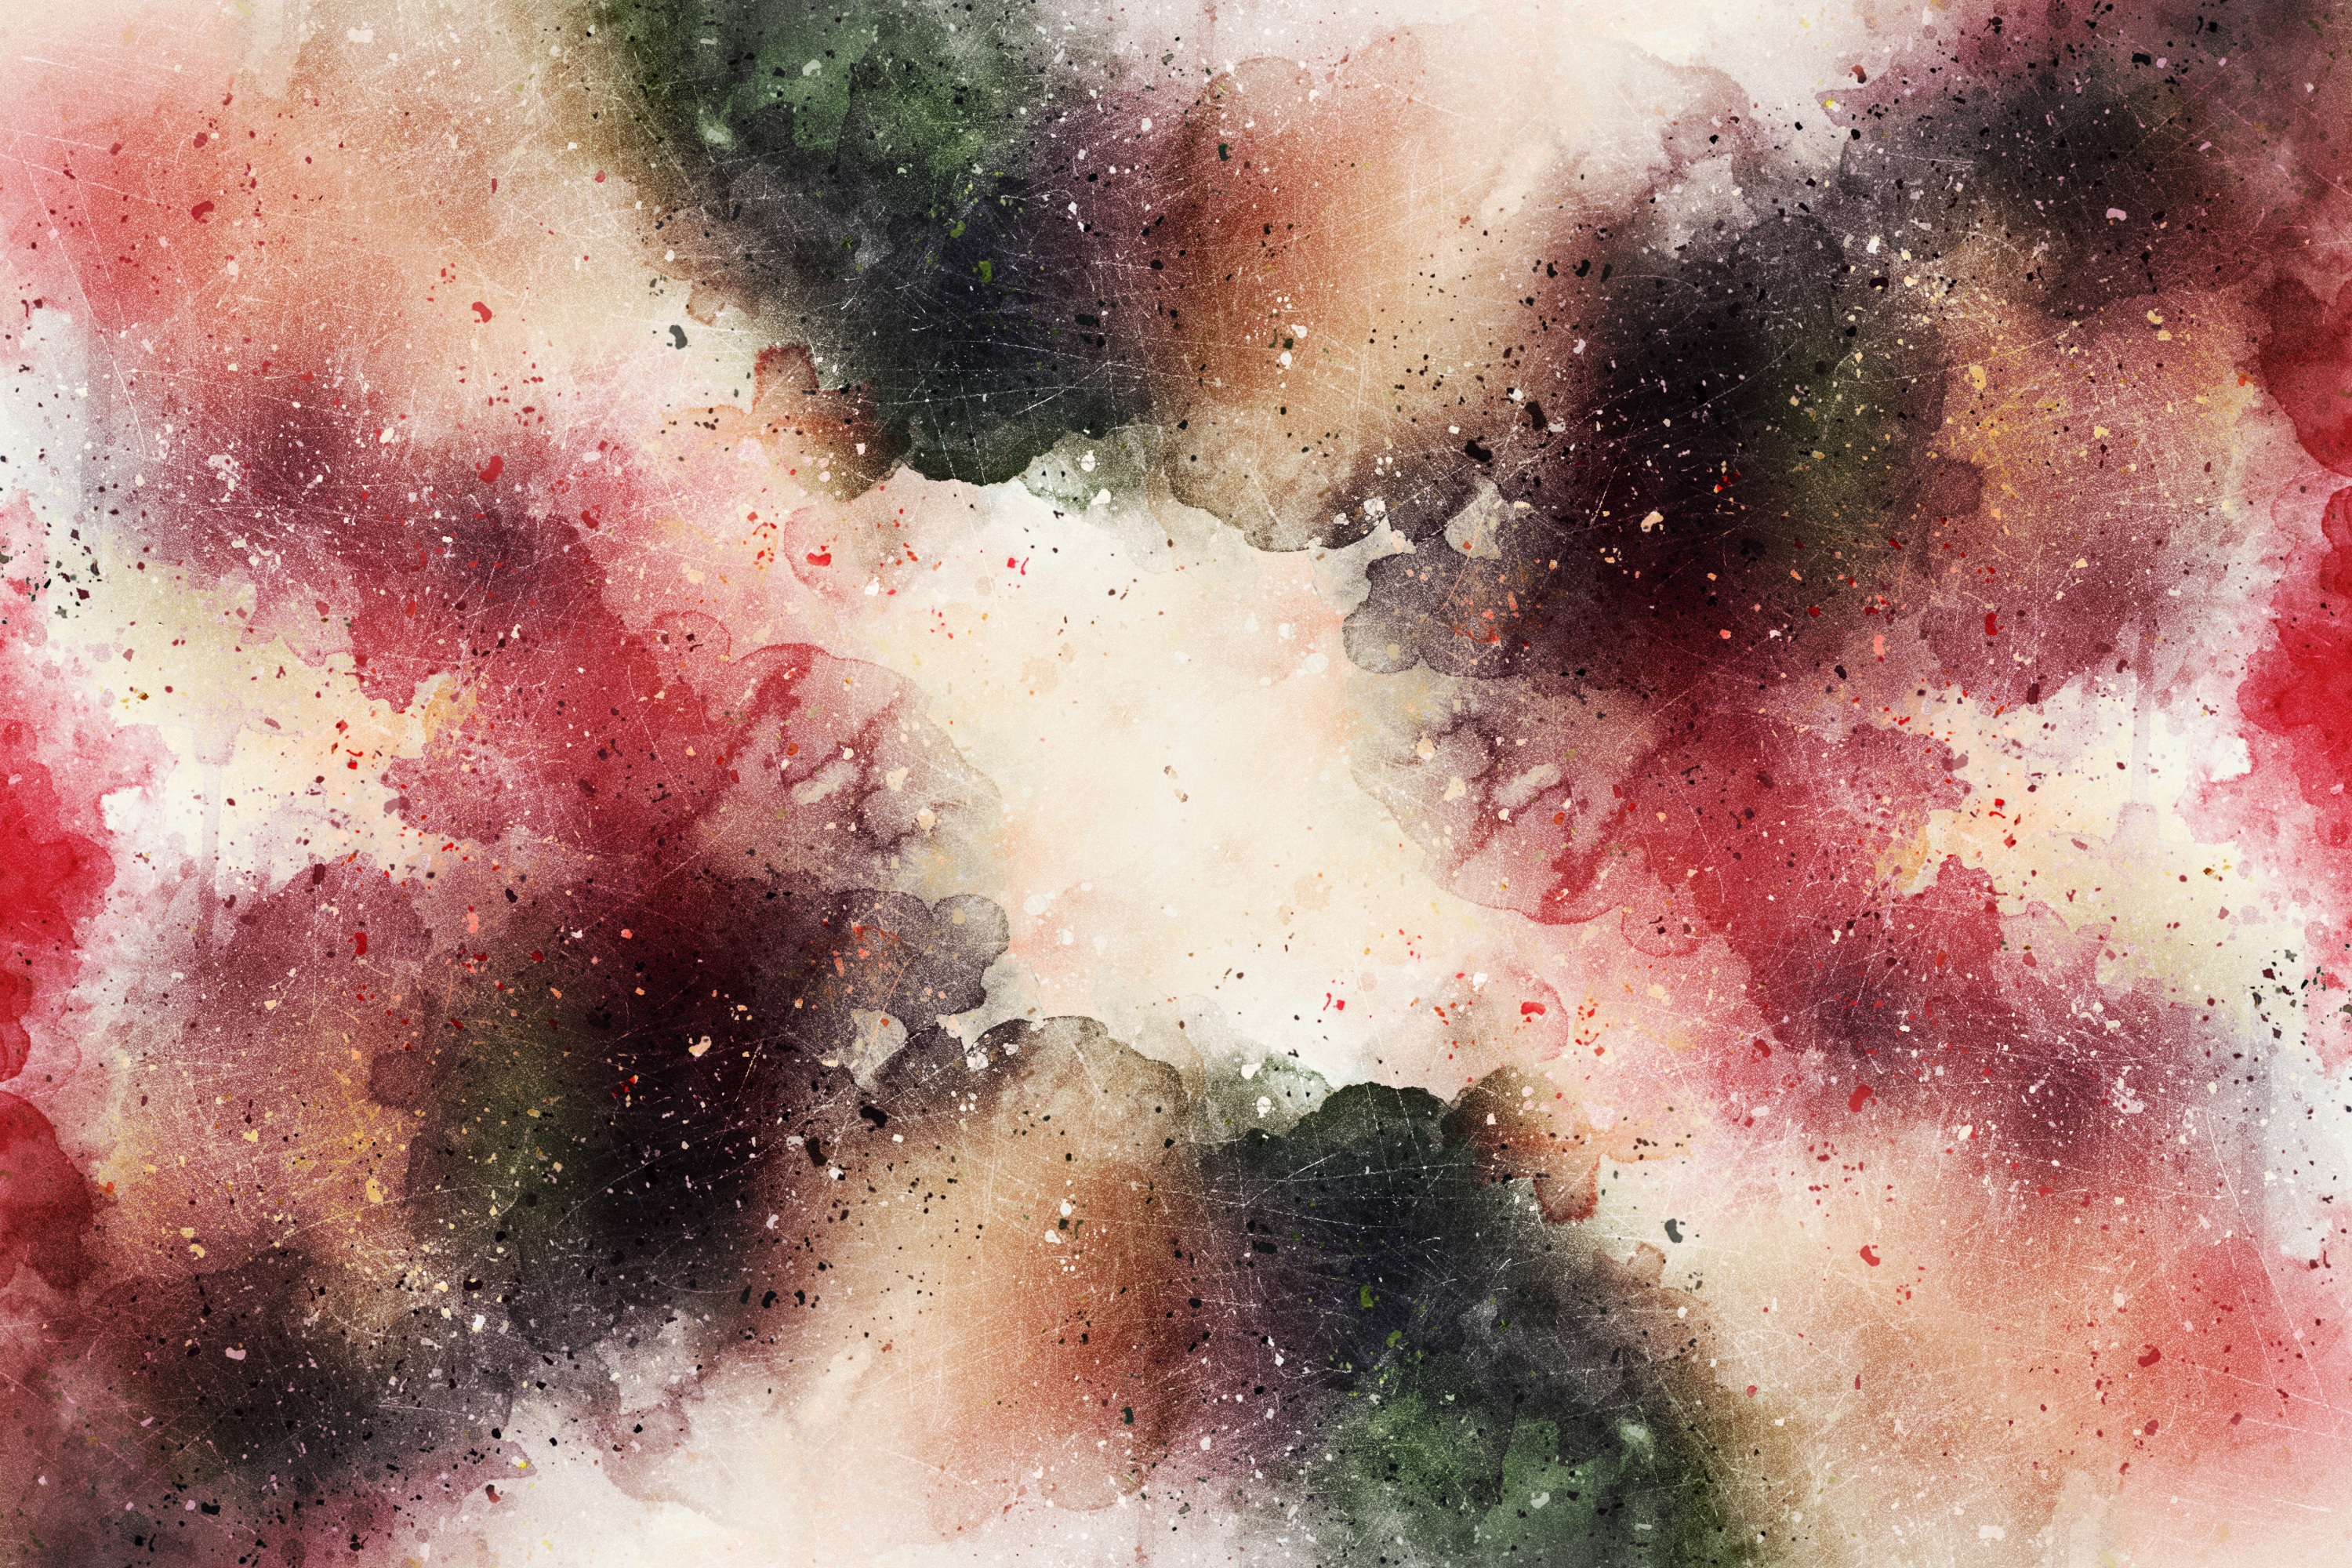 Wallpaper Full HD stains, spots, abstract, watercolor